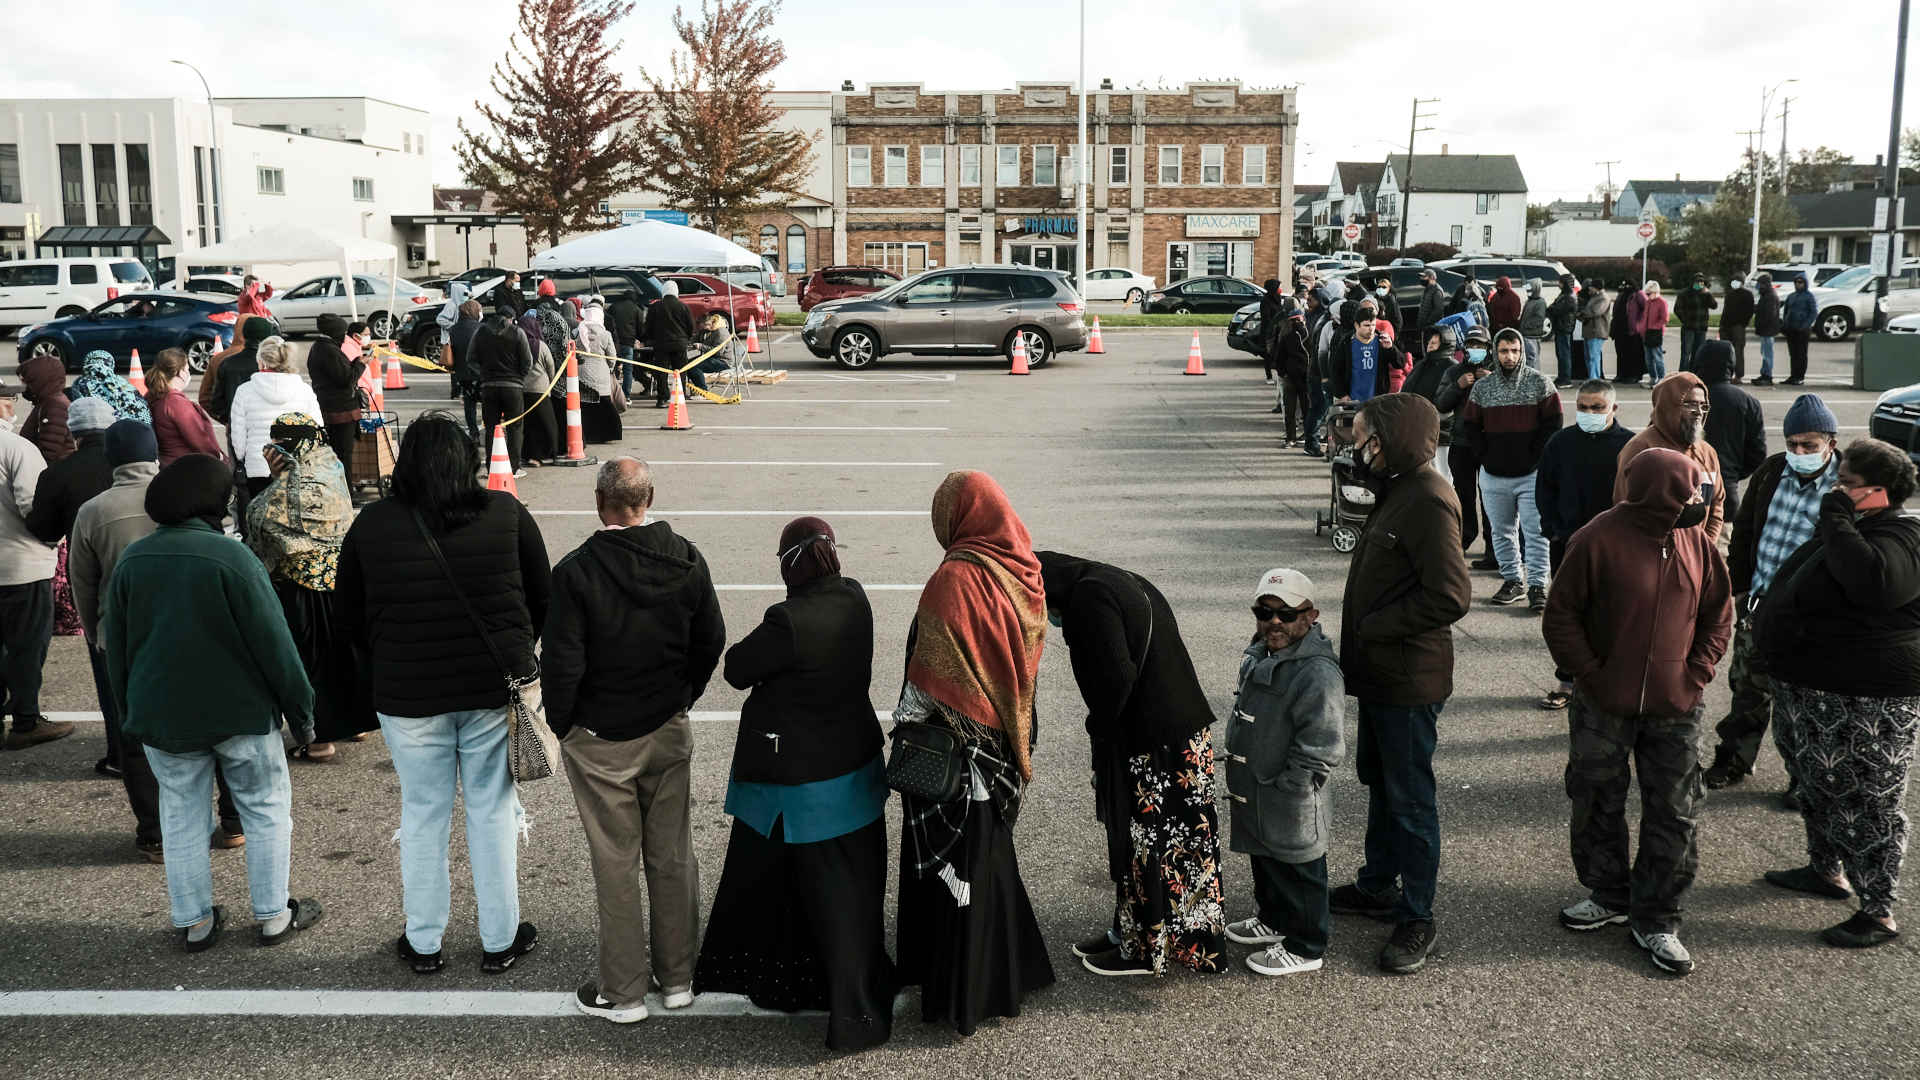 Residents of Hamtramck, Michigan, wait in long lines to receive a water filter after elevated levels of lead were found in the drinking water in Oct. 2021.